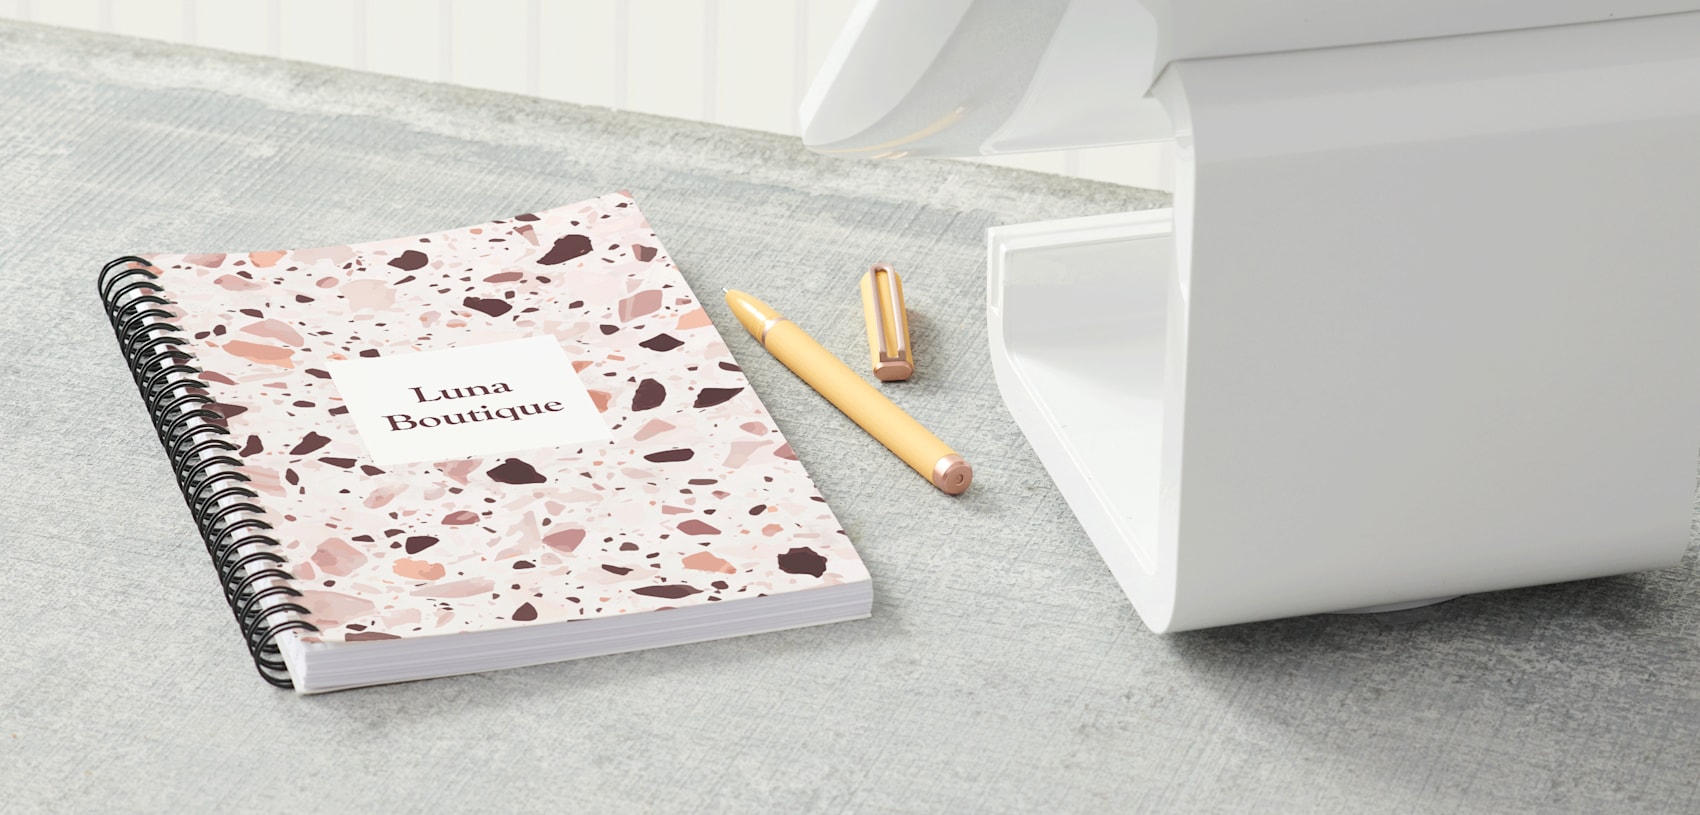 Personalised journals